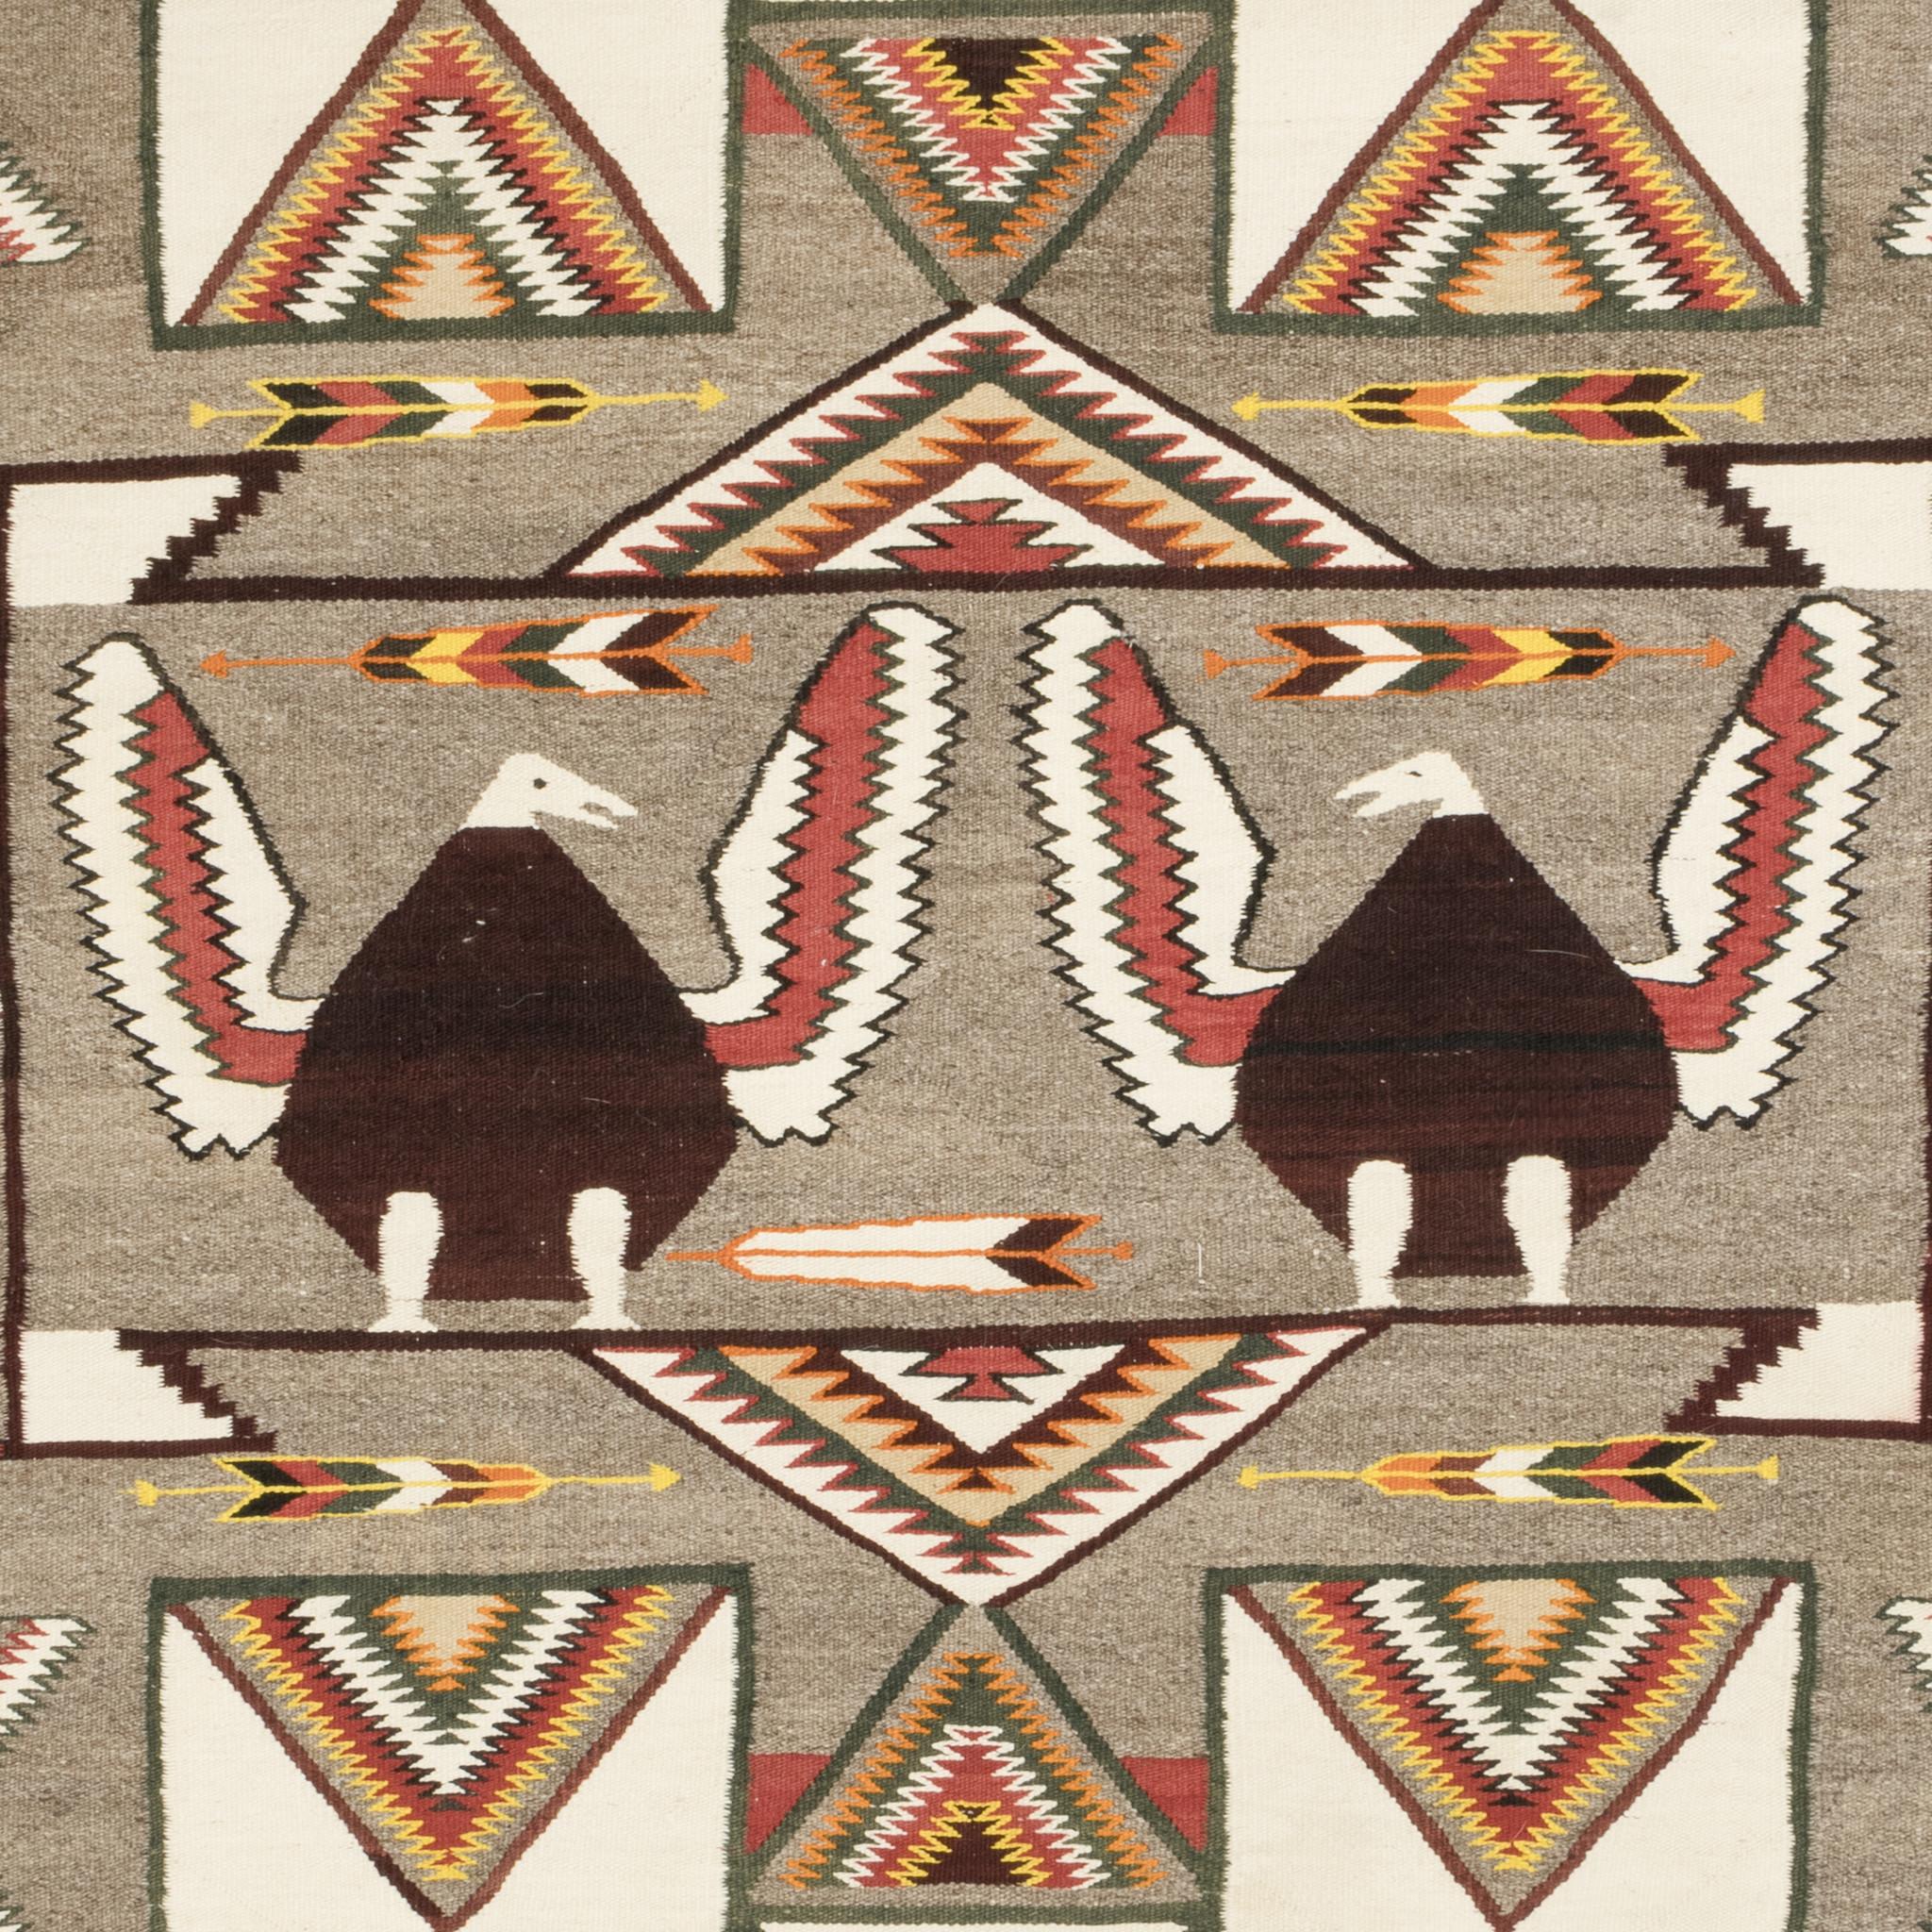 Native American Navajo Indian Red Mesa outline pictorial weaving featuring two pleasantly plump bald eagles facing each other. The birds are framed by a fine line rectangular box, which is surrounded by great Red Mesa and Teec Nos Pos elements. A